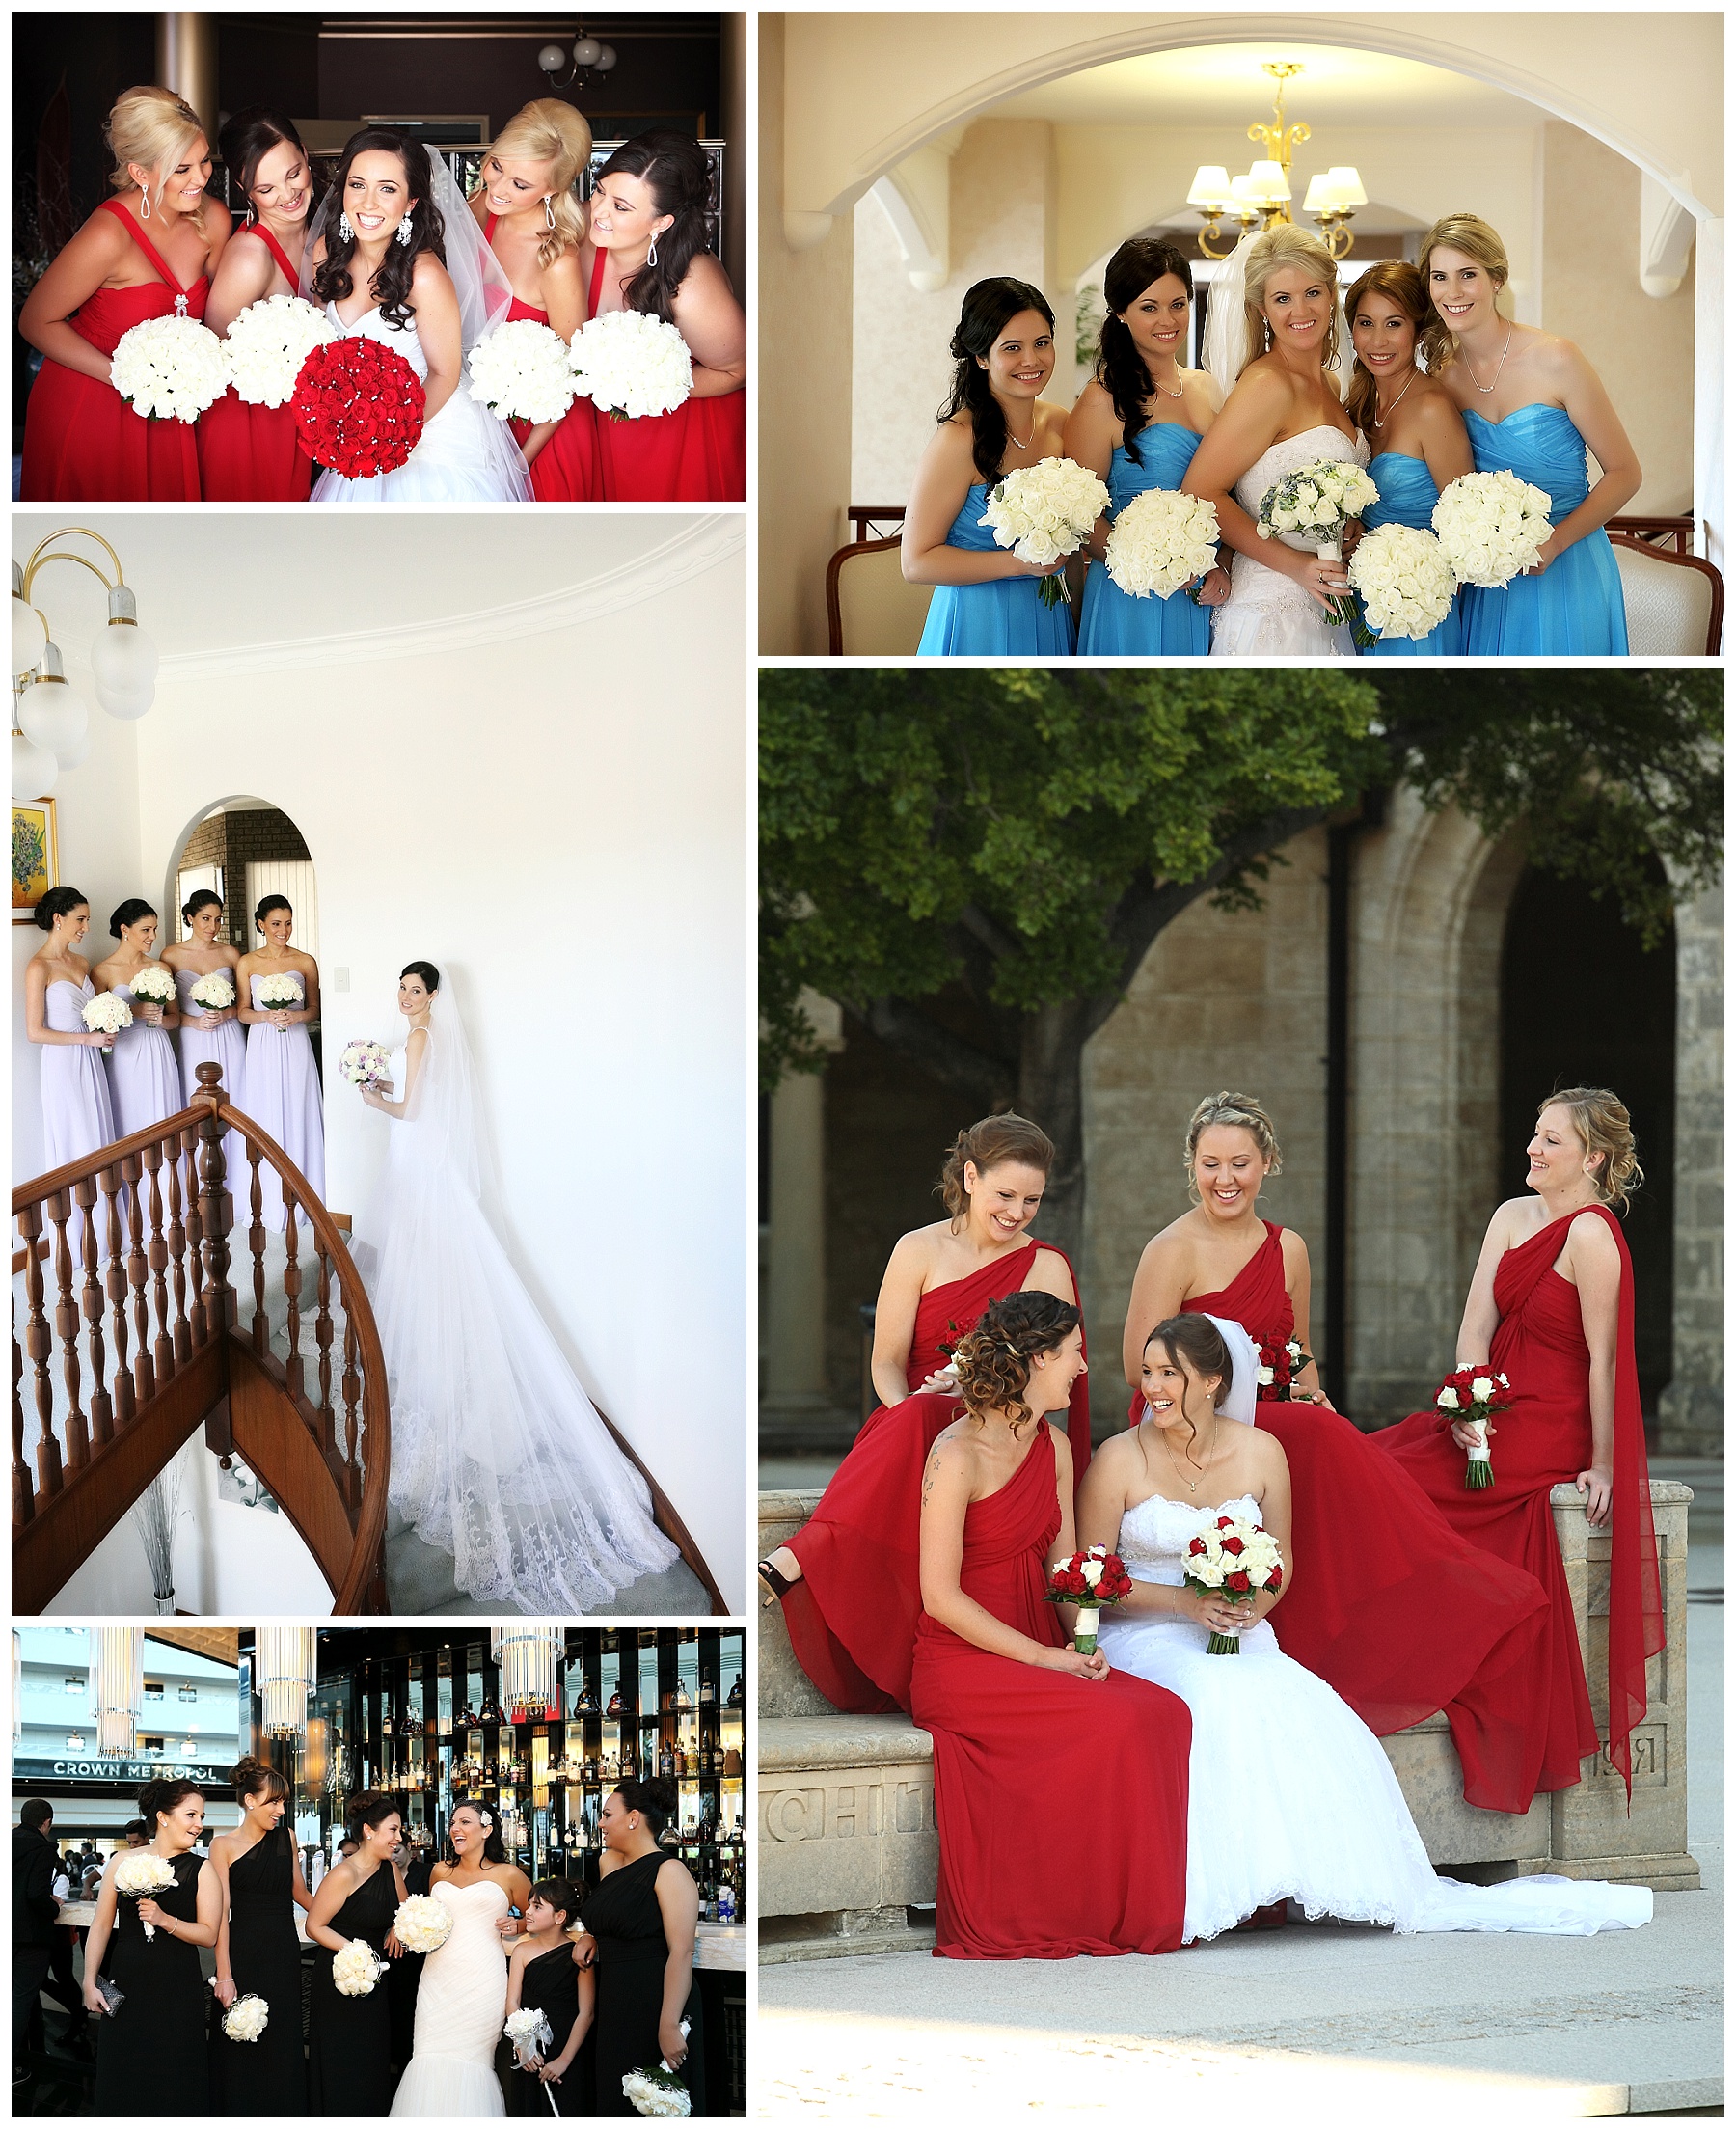  Wedding Photographer Perth showcasing how to make the most of posing a large bridal party.  